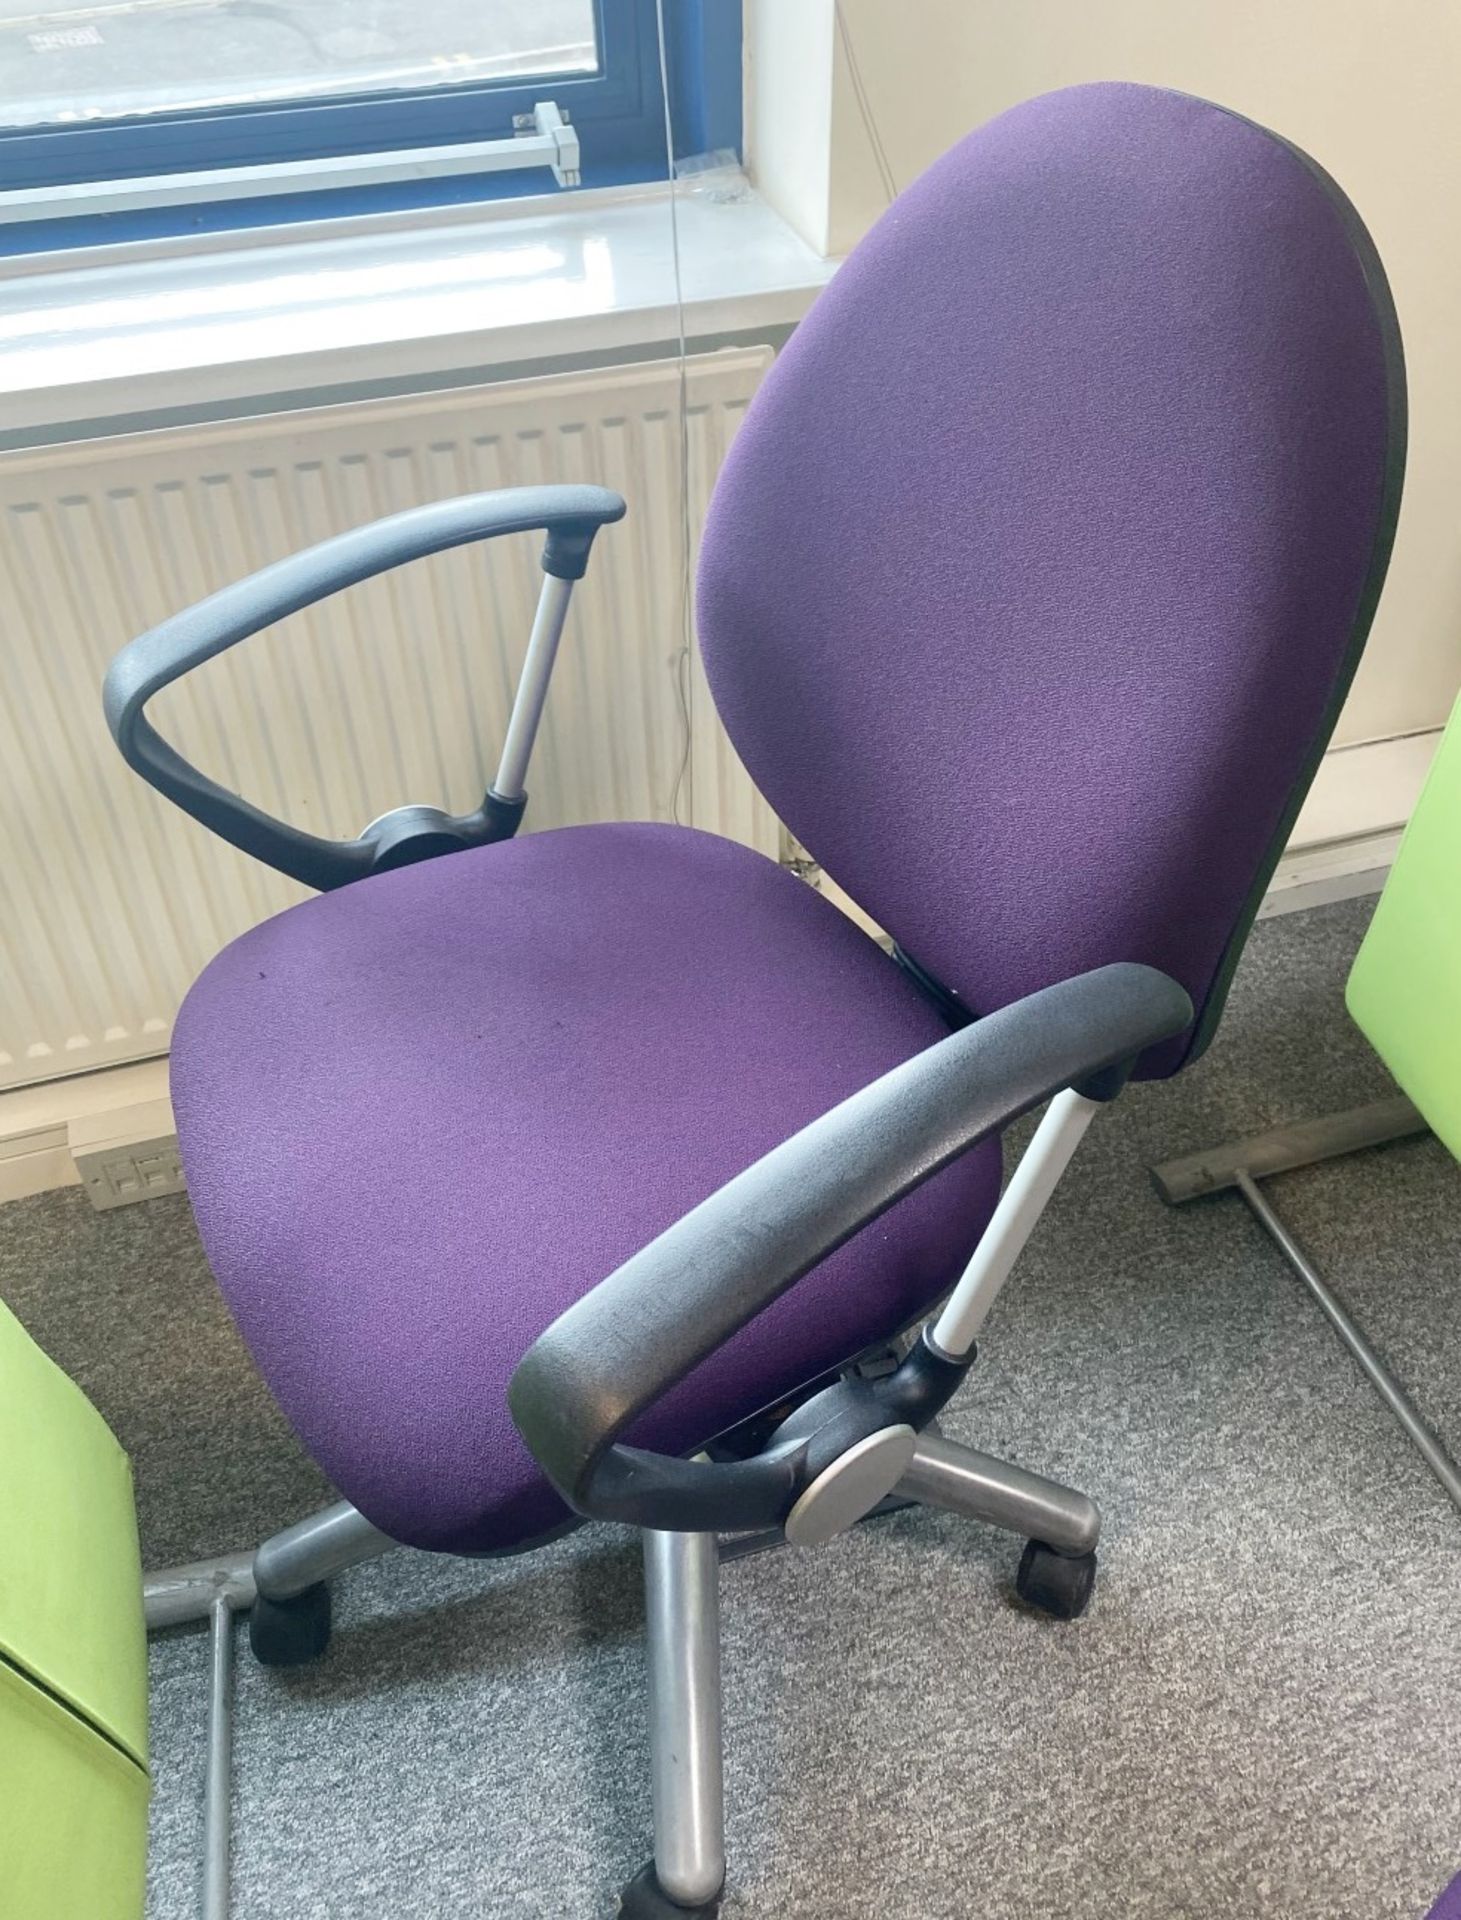 4 x TORASEN 'Mercury' Office Purple Swivel Chairs (M60A) - From An Executive Office Environment - - Image 3 of 6